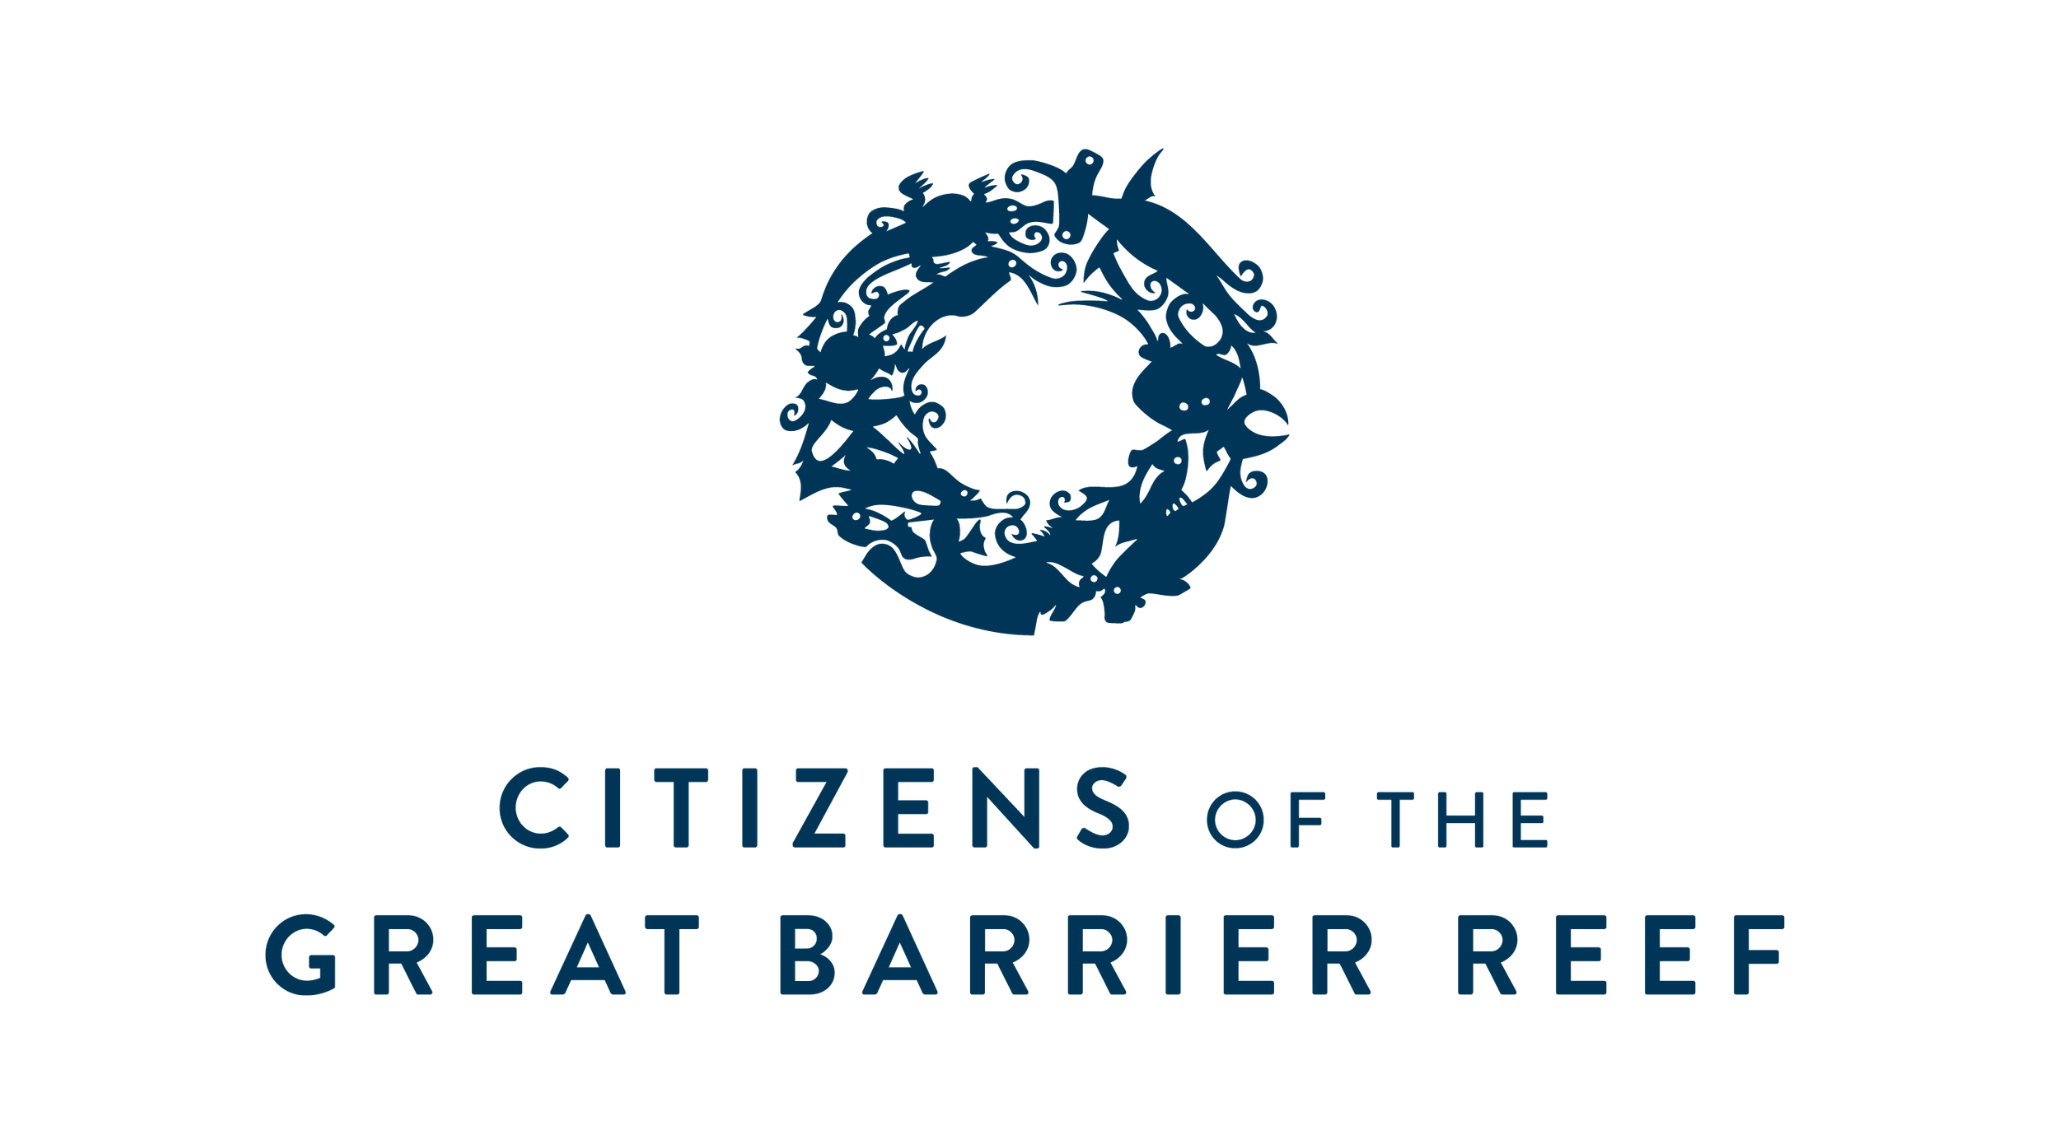 Citizens of the great barrier reef logo